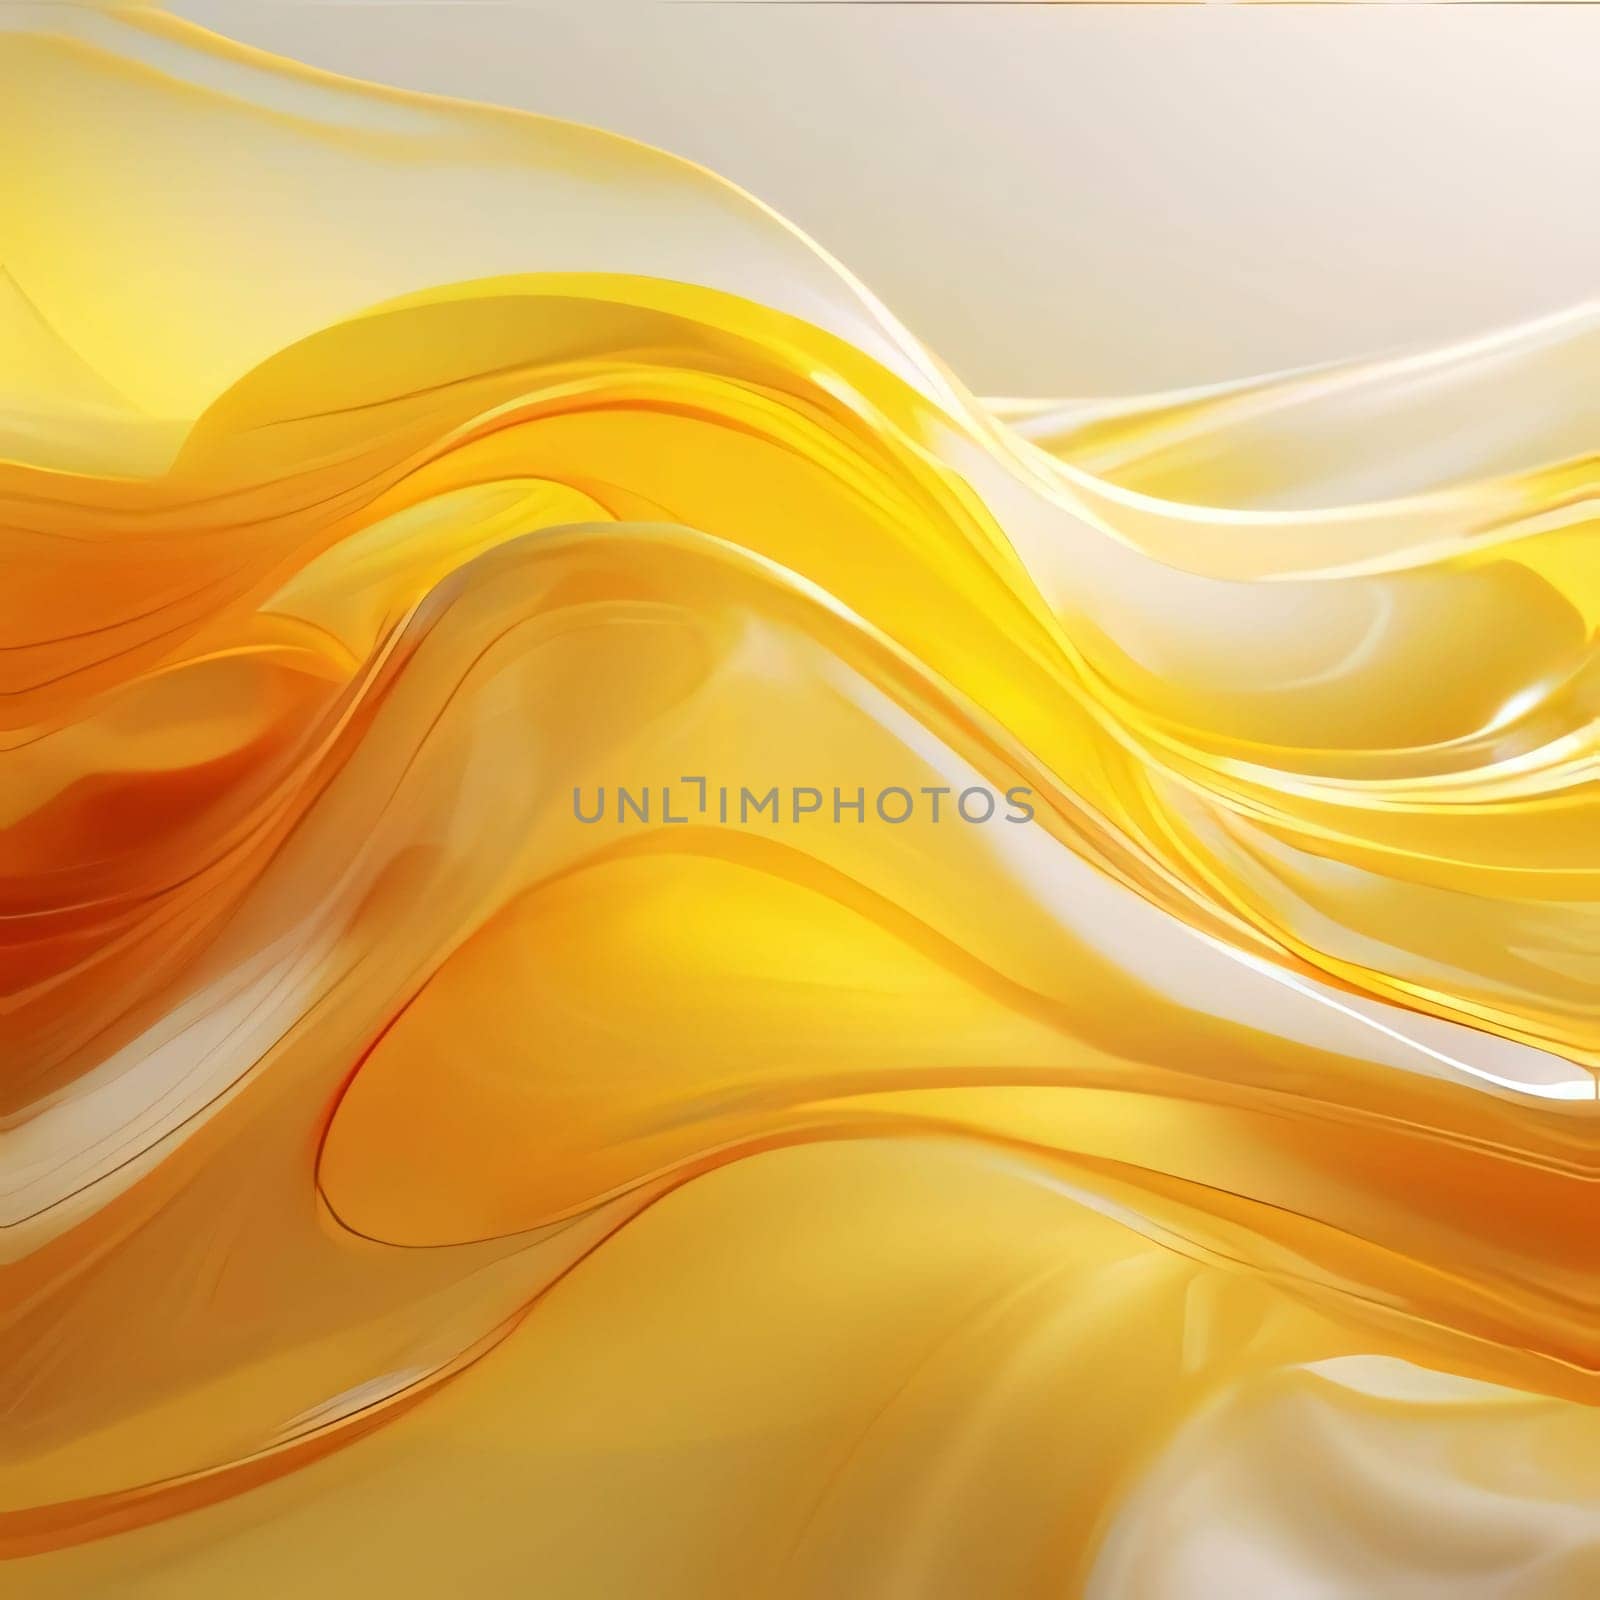 Abstract background design: abstract background with smooth lines in yellow and orange colors for design